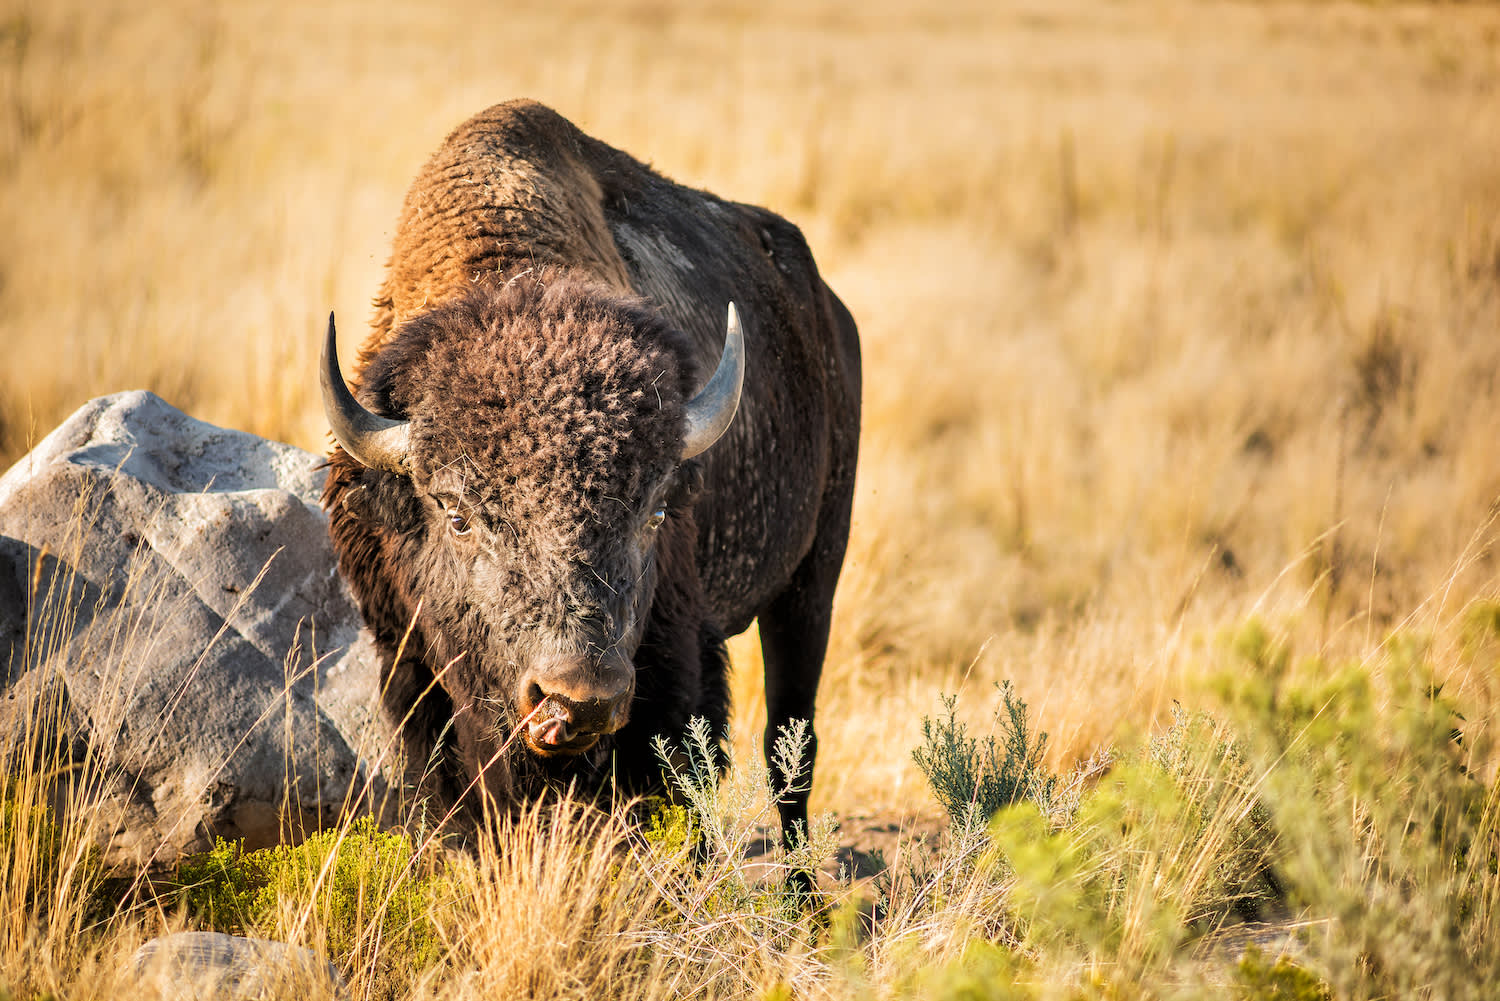 Bison grazing on grassy plain, Antelope Island_stock - A bison stares into the camera while grazing on a grassy plain on Antelope Island, Utah.